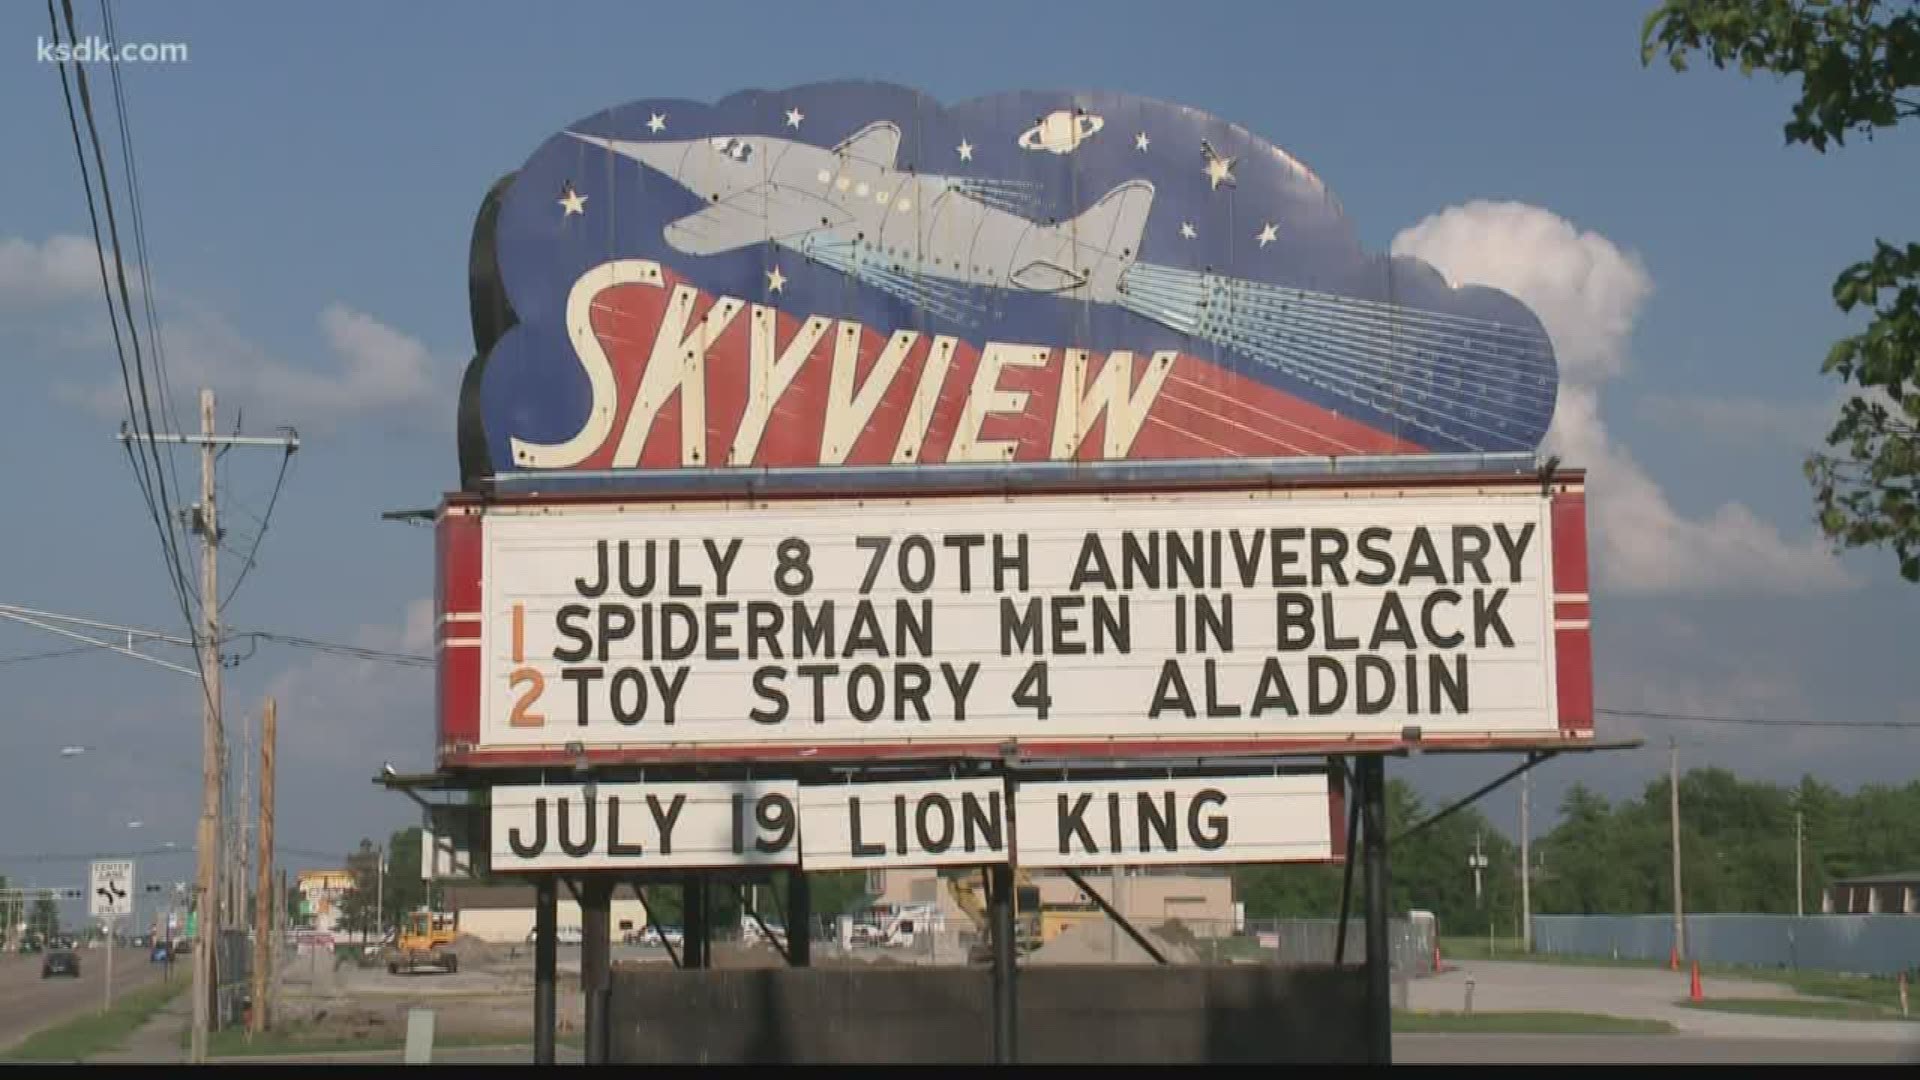 Skyview Drive-In celebrates 70 years